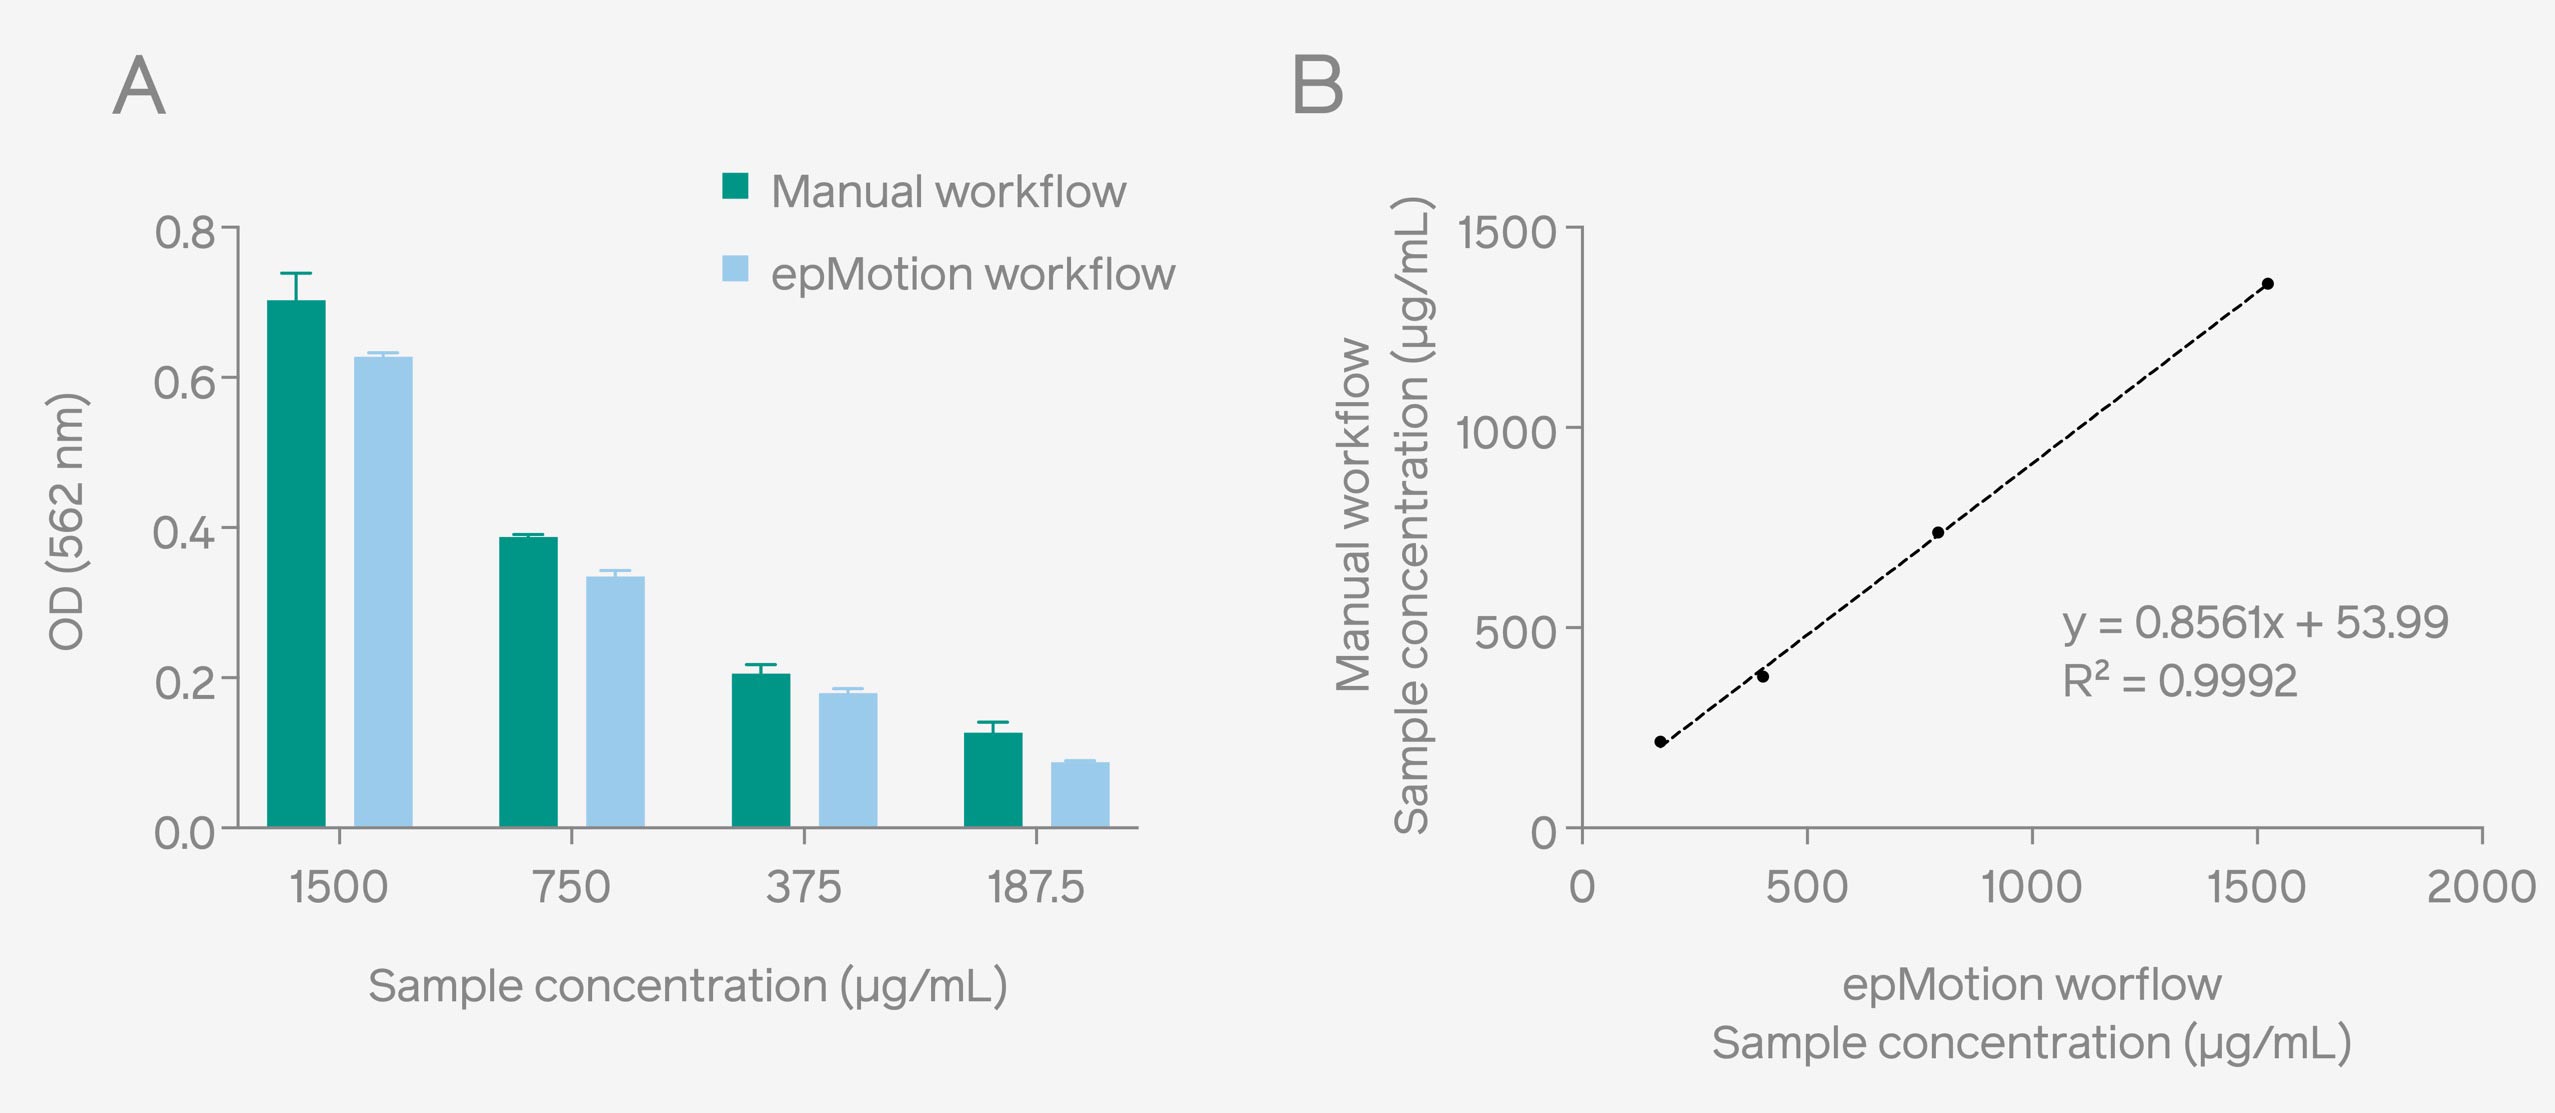 Fig. 2: OD readouts of unknown protein samples obtained through the epMotion® and manual workflow using Pierce™ Microplate BCA Protein Assay Kit (A). A comparison shows a strong correlation of the sample concentration between both methods (B). Streamlined Protein Quantification: Enhancing Speed and Precision with Absorbance 96 Automate seamlessly integrated into Eppendorf® epMotion® Byonoy